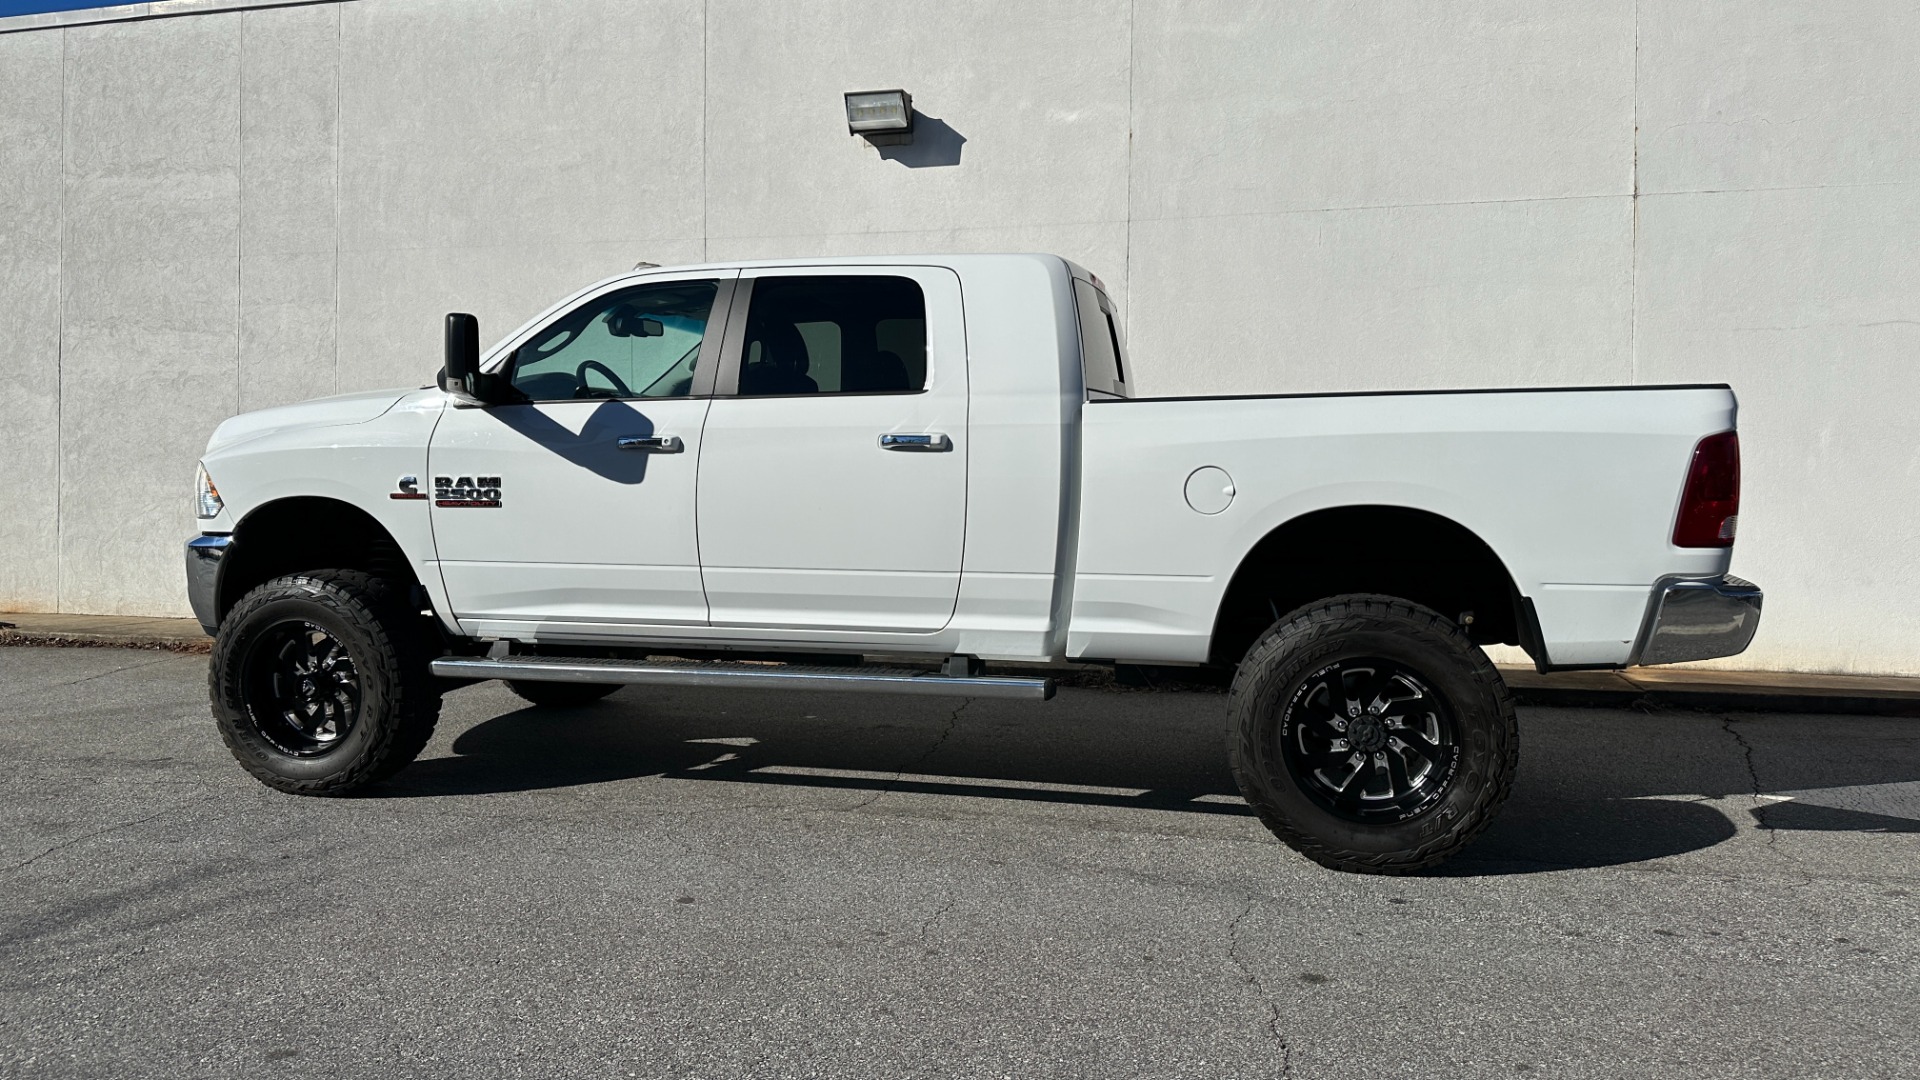 Used 2016 Ram 2500 BIG HORN / FUEL WHEELS / LIFT KIT / 37IN TIRES / CUMMINS 6.7 / LUXURY GROUP for sale $49,995 at Formula Imports in Charlotte NC 28227 3